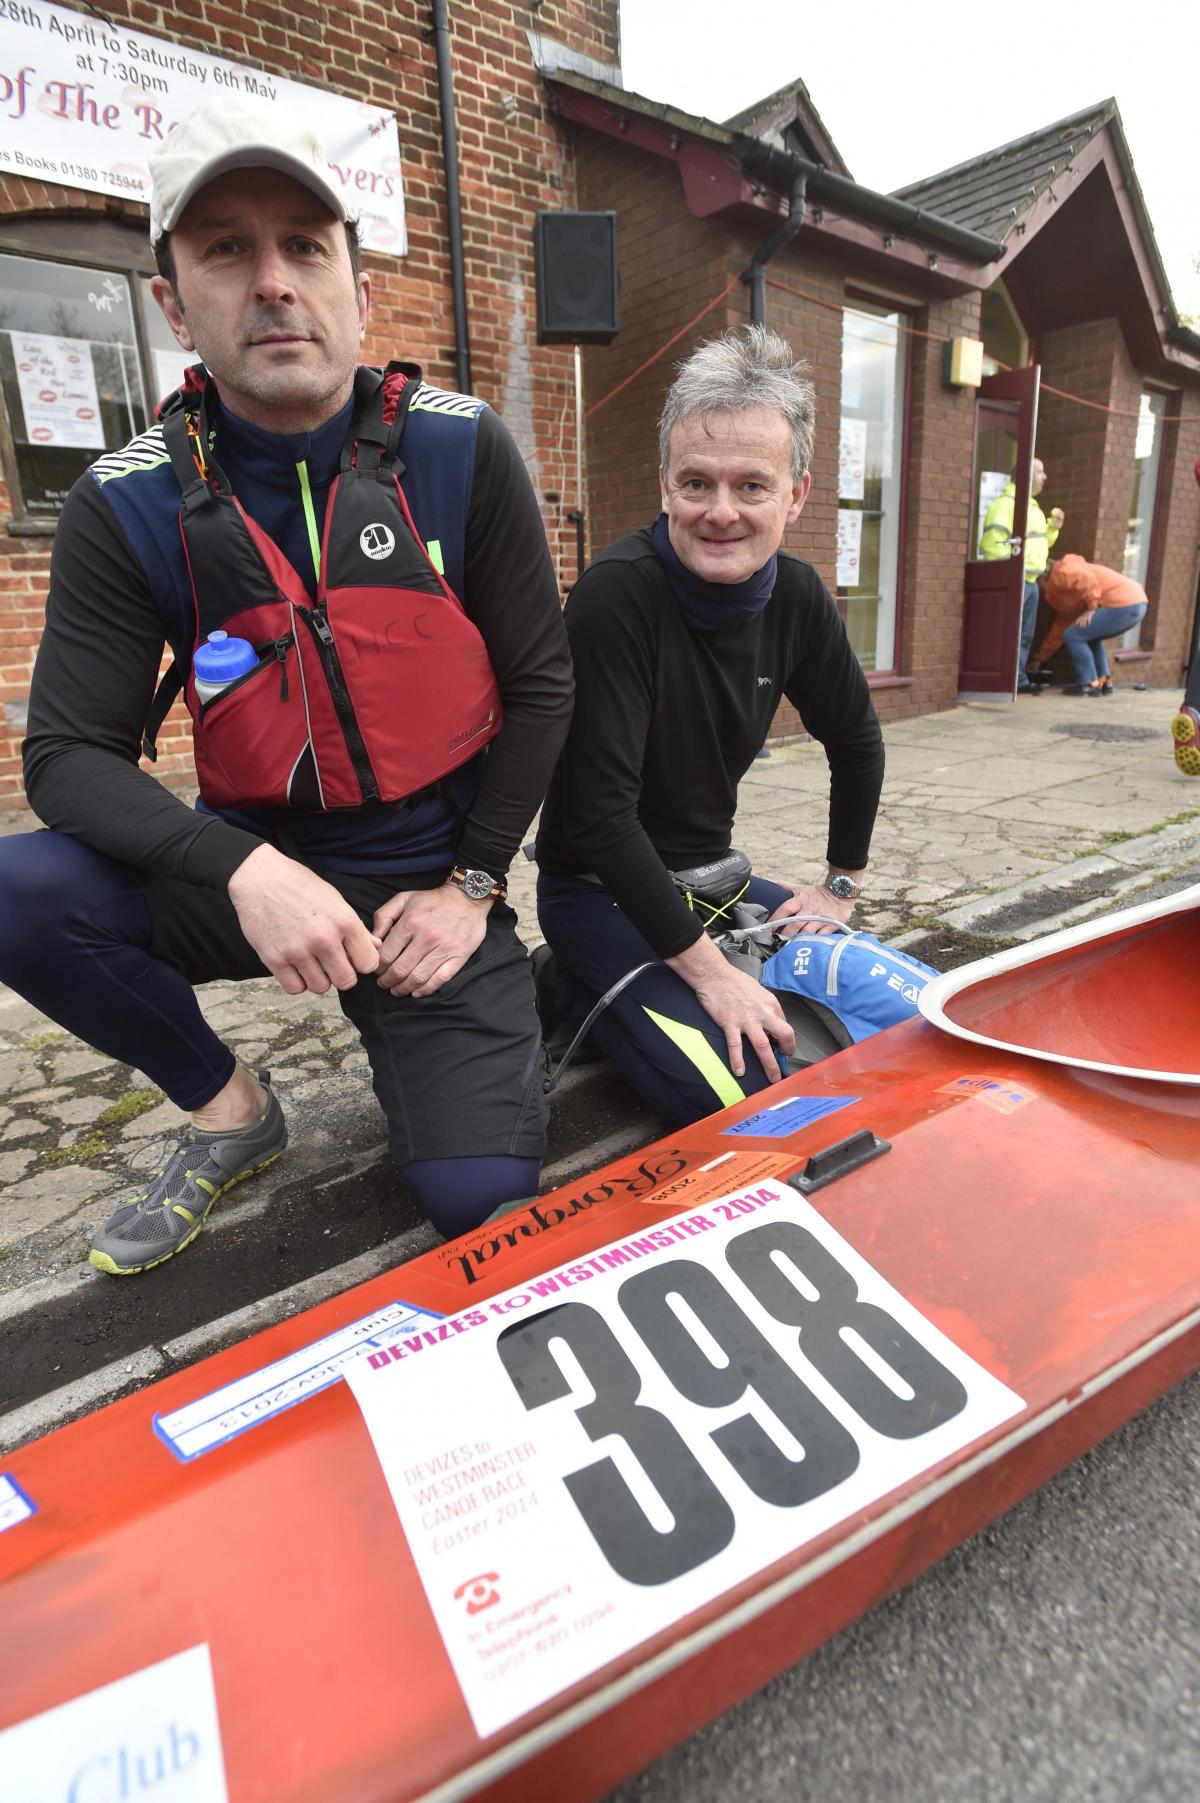 Scenes from Devizes to Westminster Canoe Race